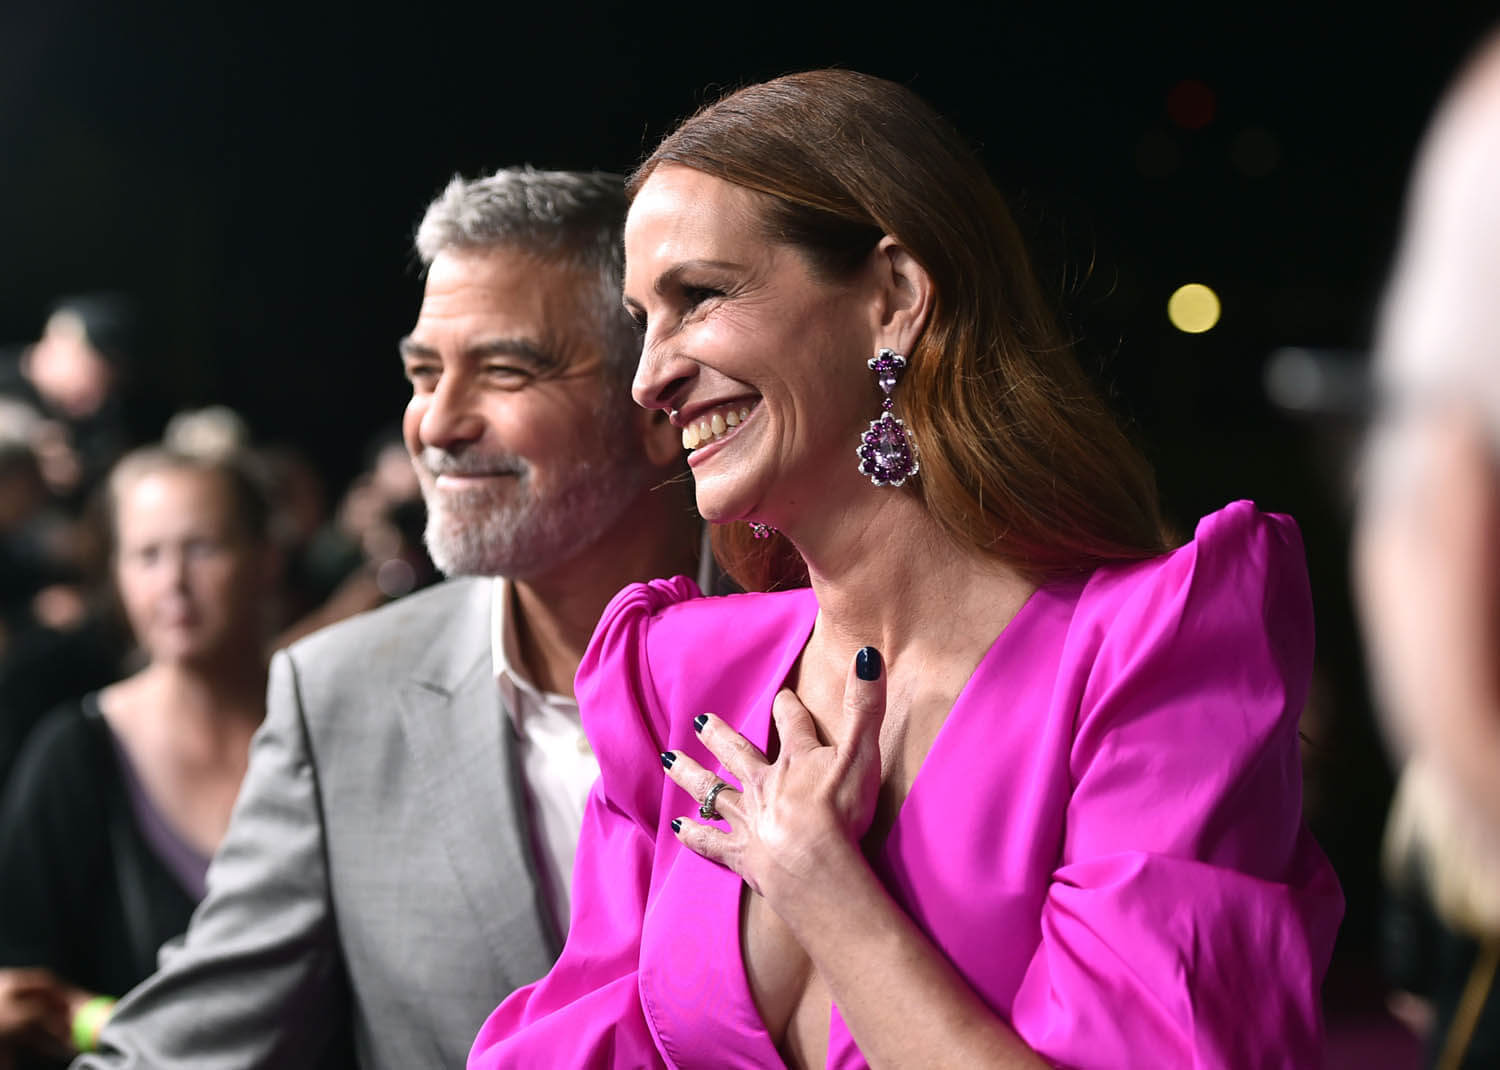 Julia Roberts and George Clooney Star in Romantic Comedy 'Ticket